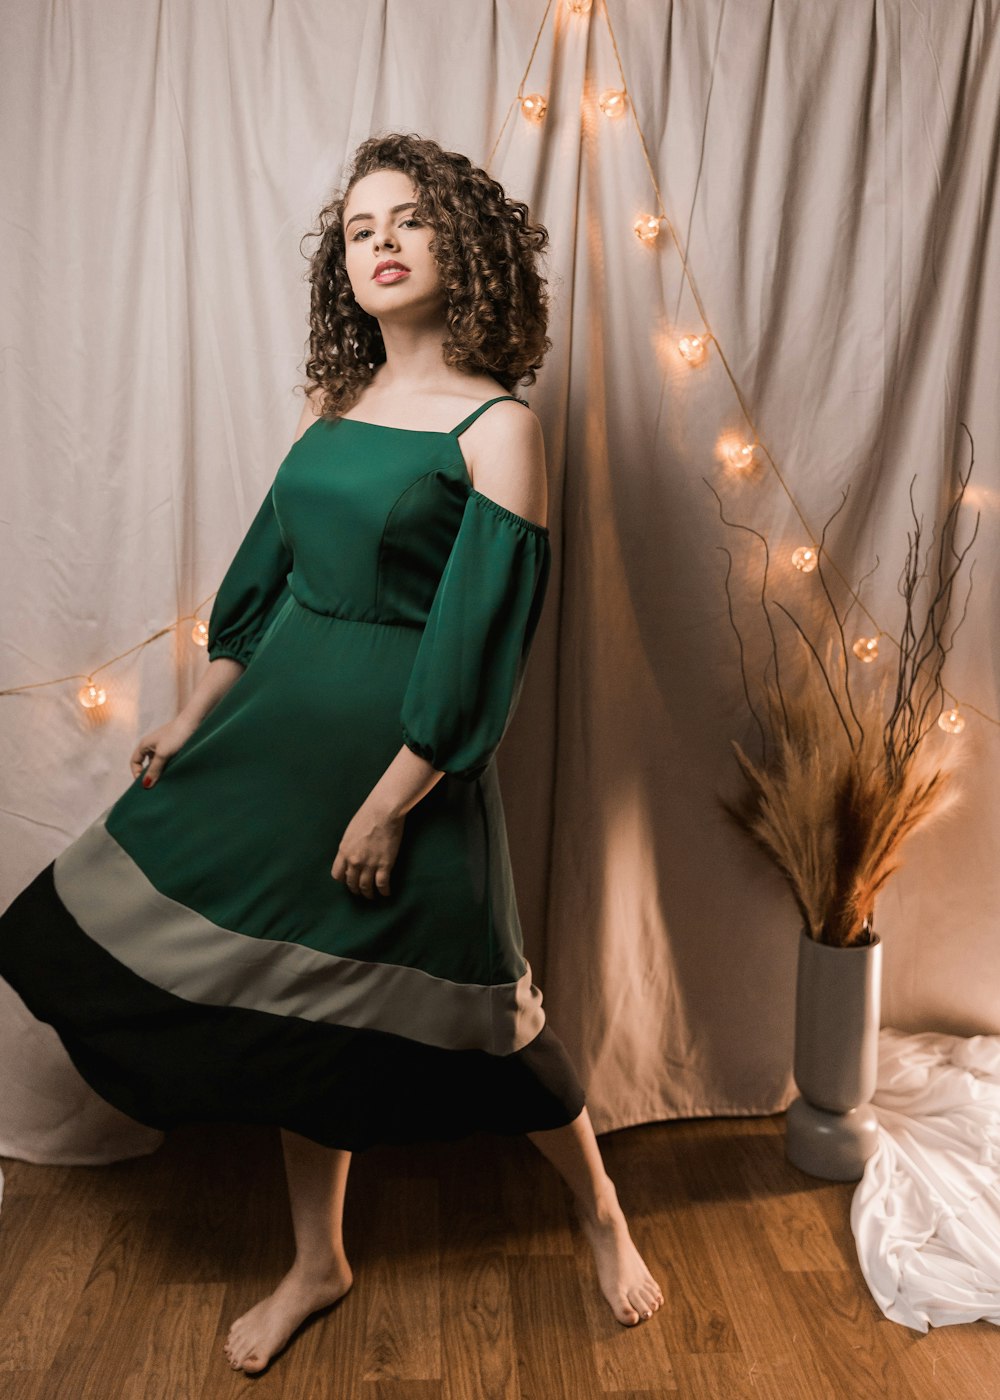 Woman in green and black dress standing beside brown and white floral  curtain photo – Free Mulher Image on Unsplash